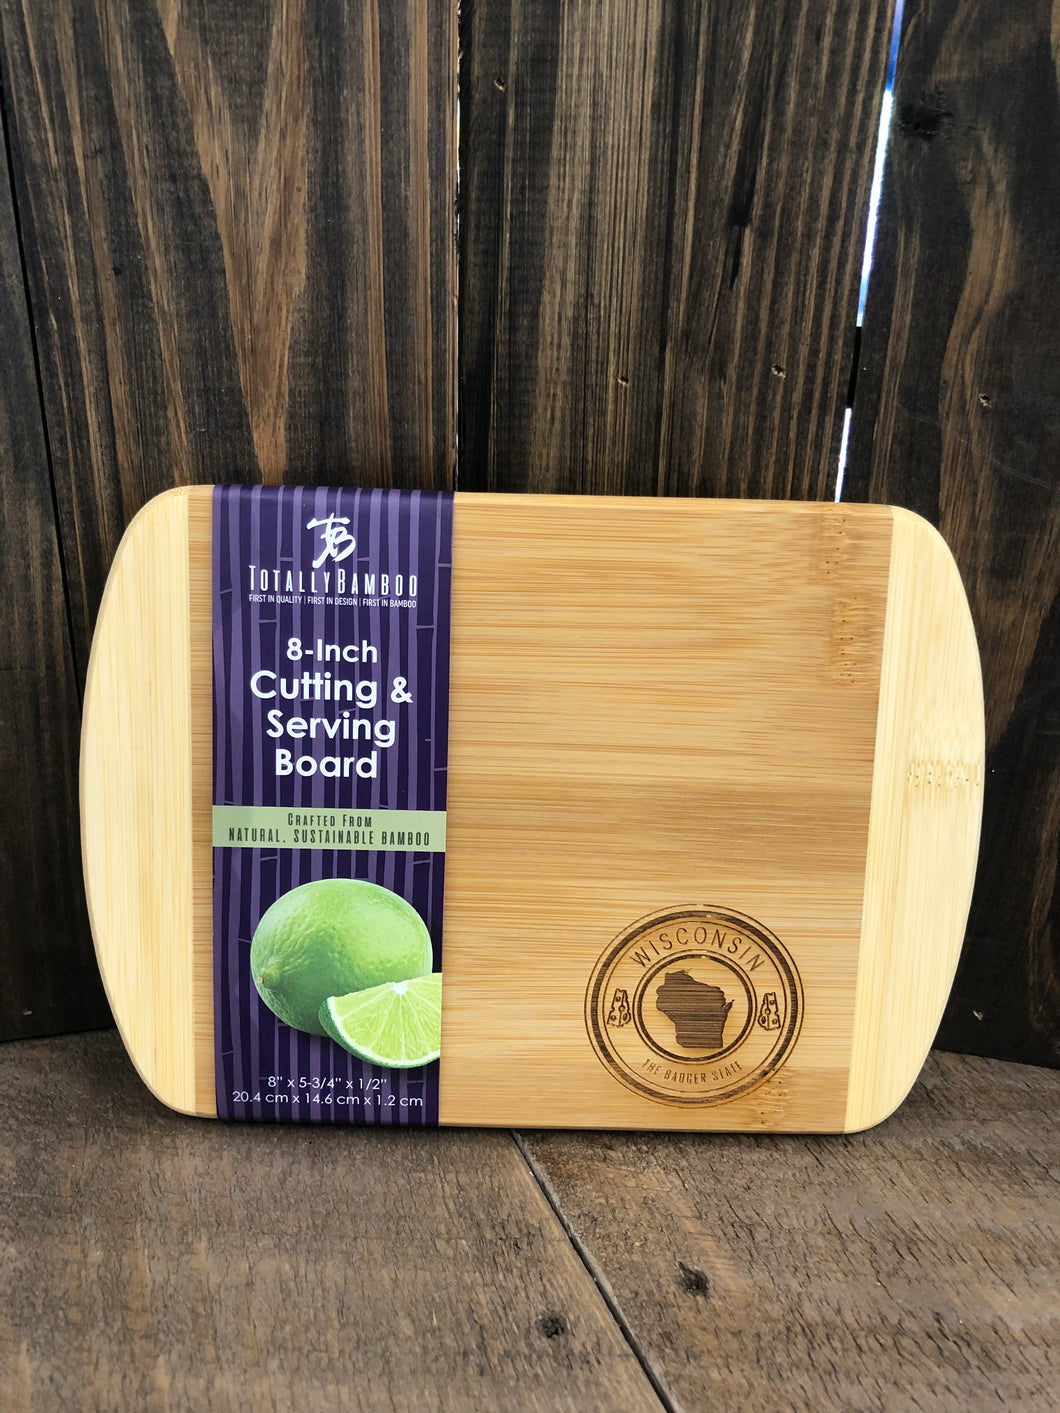 Totally Bamboo Wisconsin Stamp Cutting and Serving Board, 8